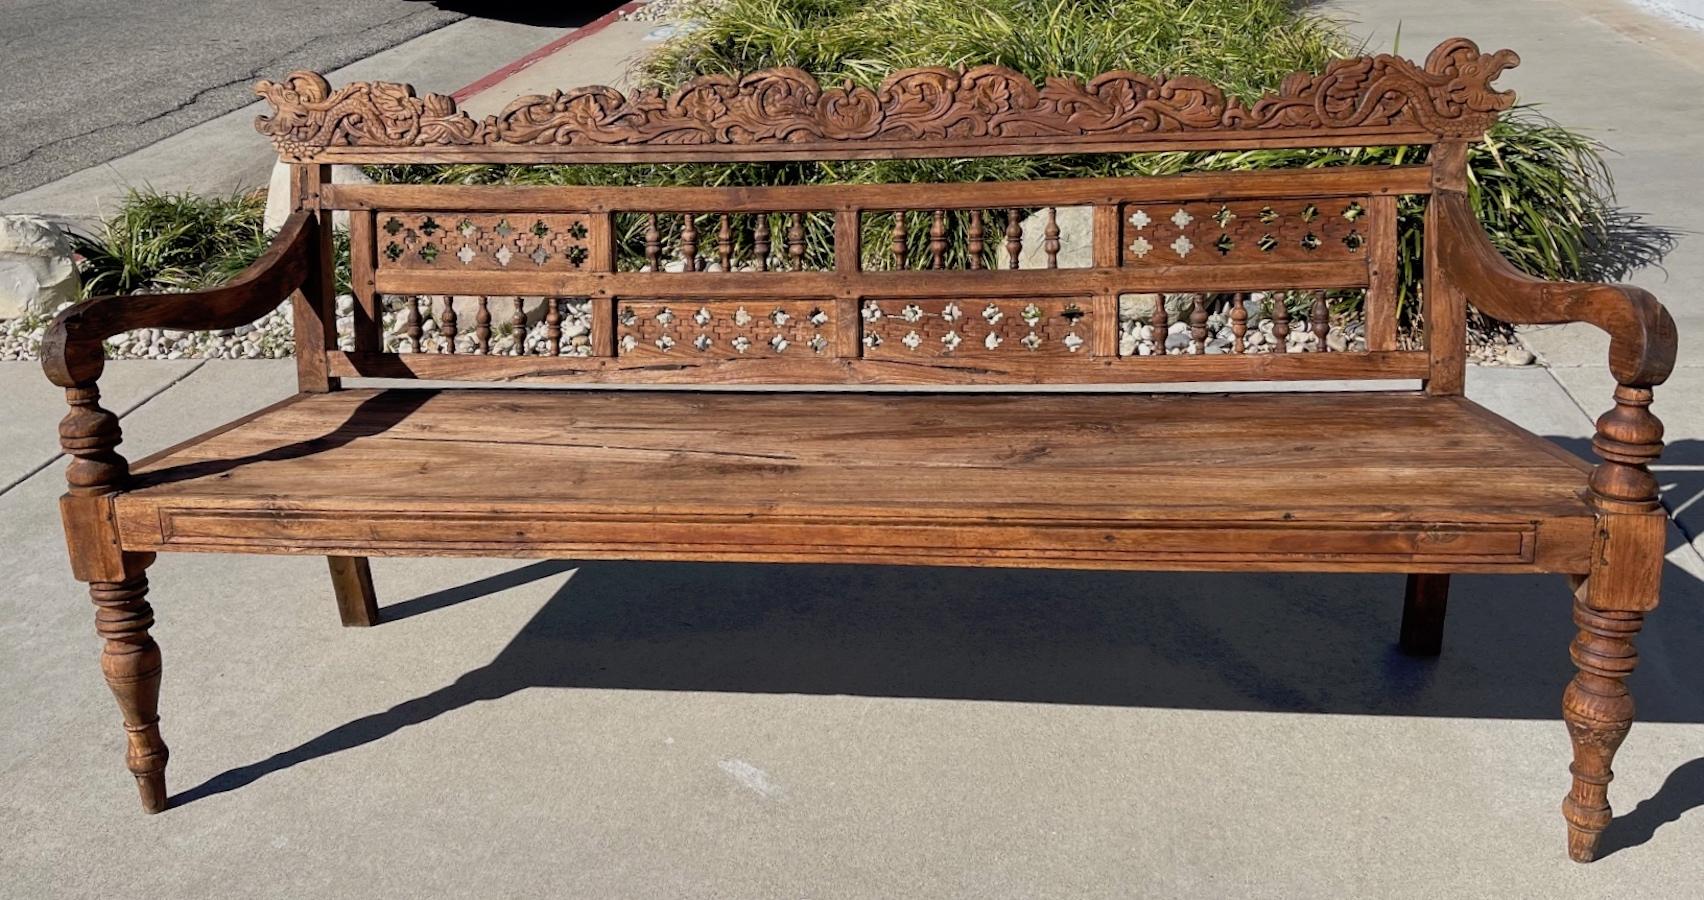 This is a hand-crafted 19th century teak garden bench with intricate carving on the back and carved shaped arms.